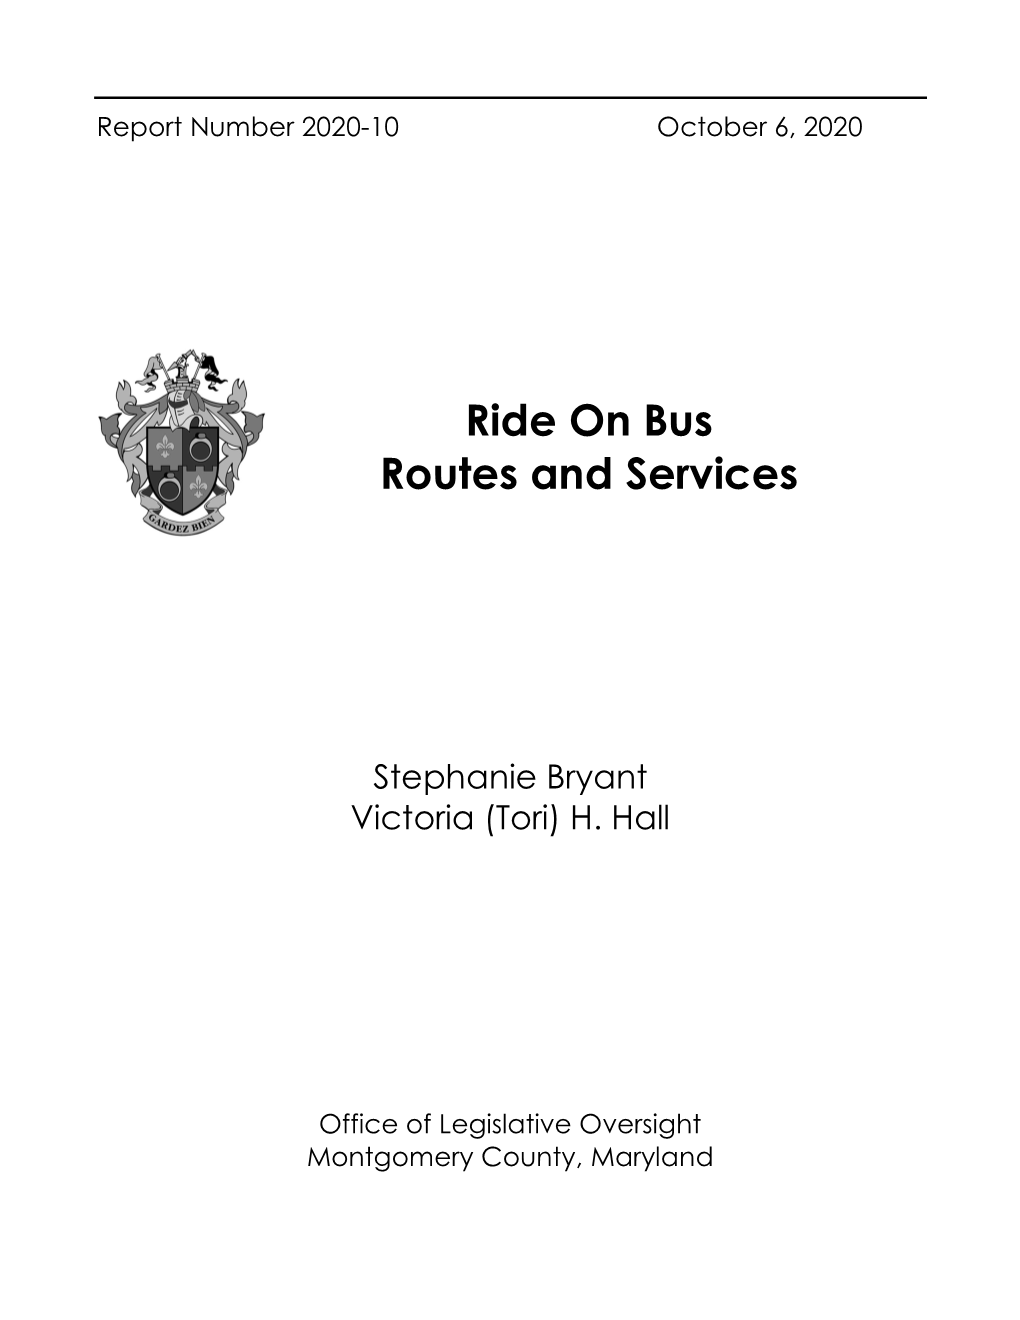 OLO Report Number 2020-10 Ride on Bus Routes and Services